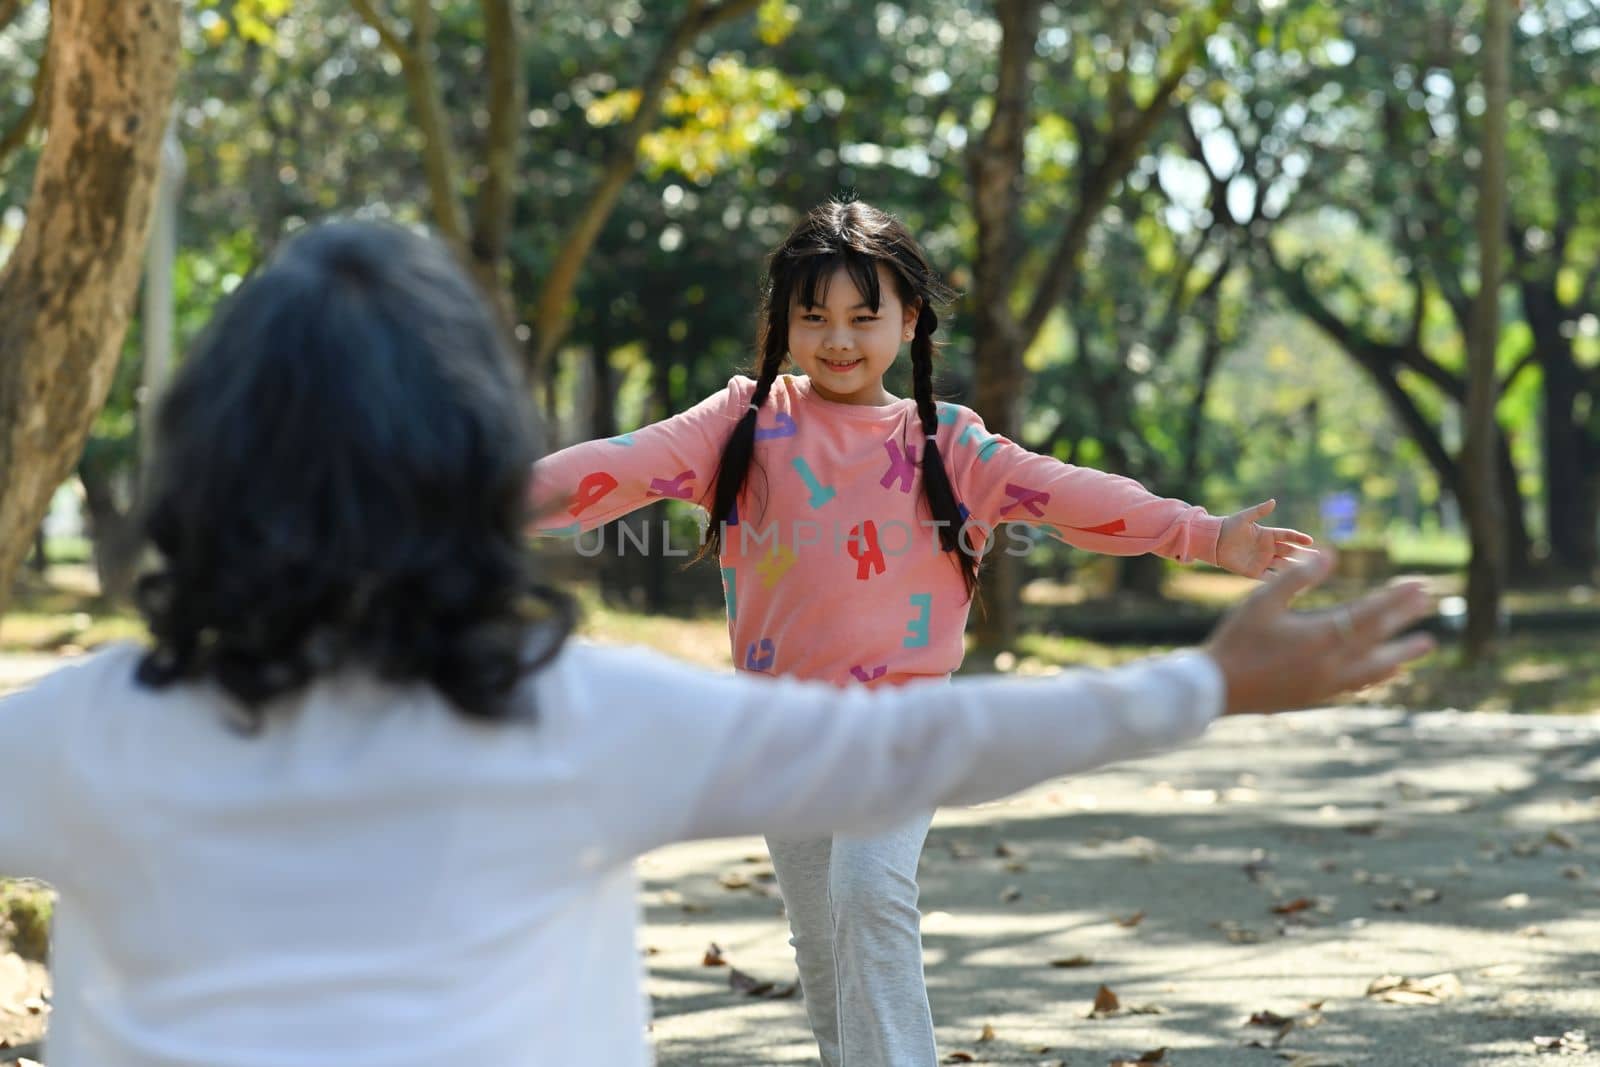 Affectionate little girl running to hug grandmother with arms open. Happy moment, family and love concept by prathanchorruangsak